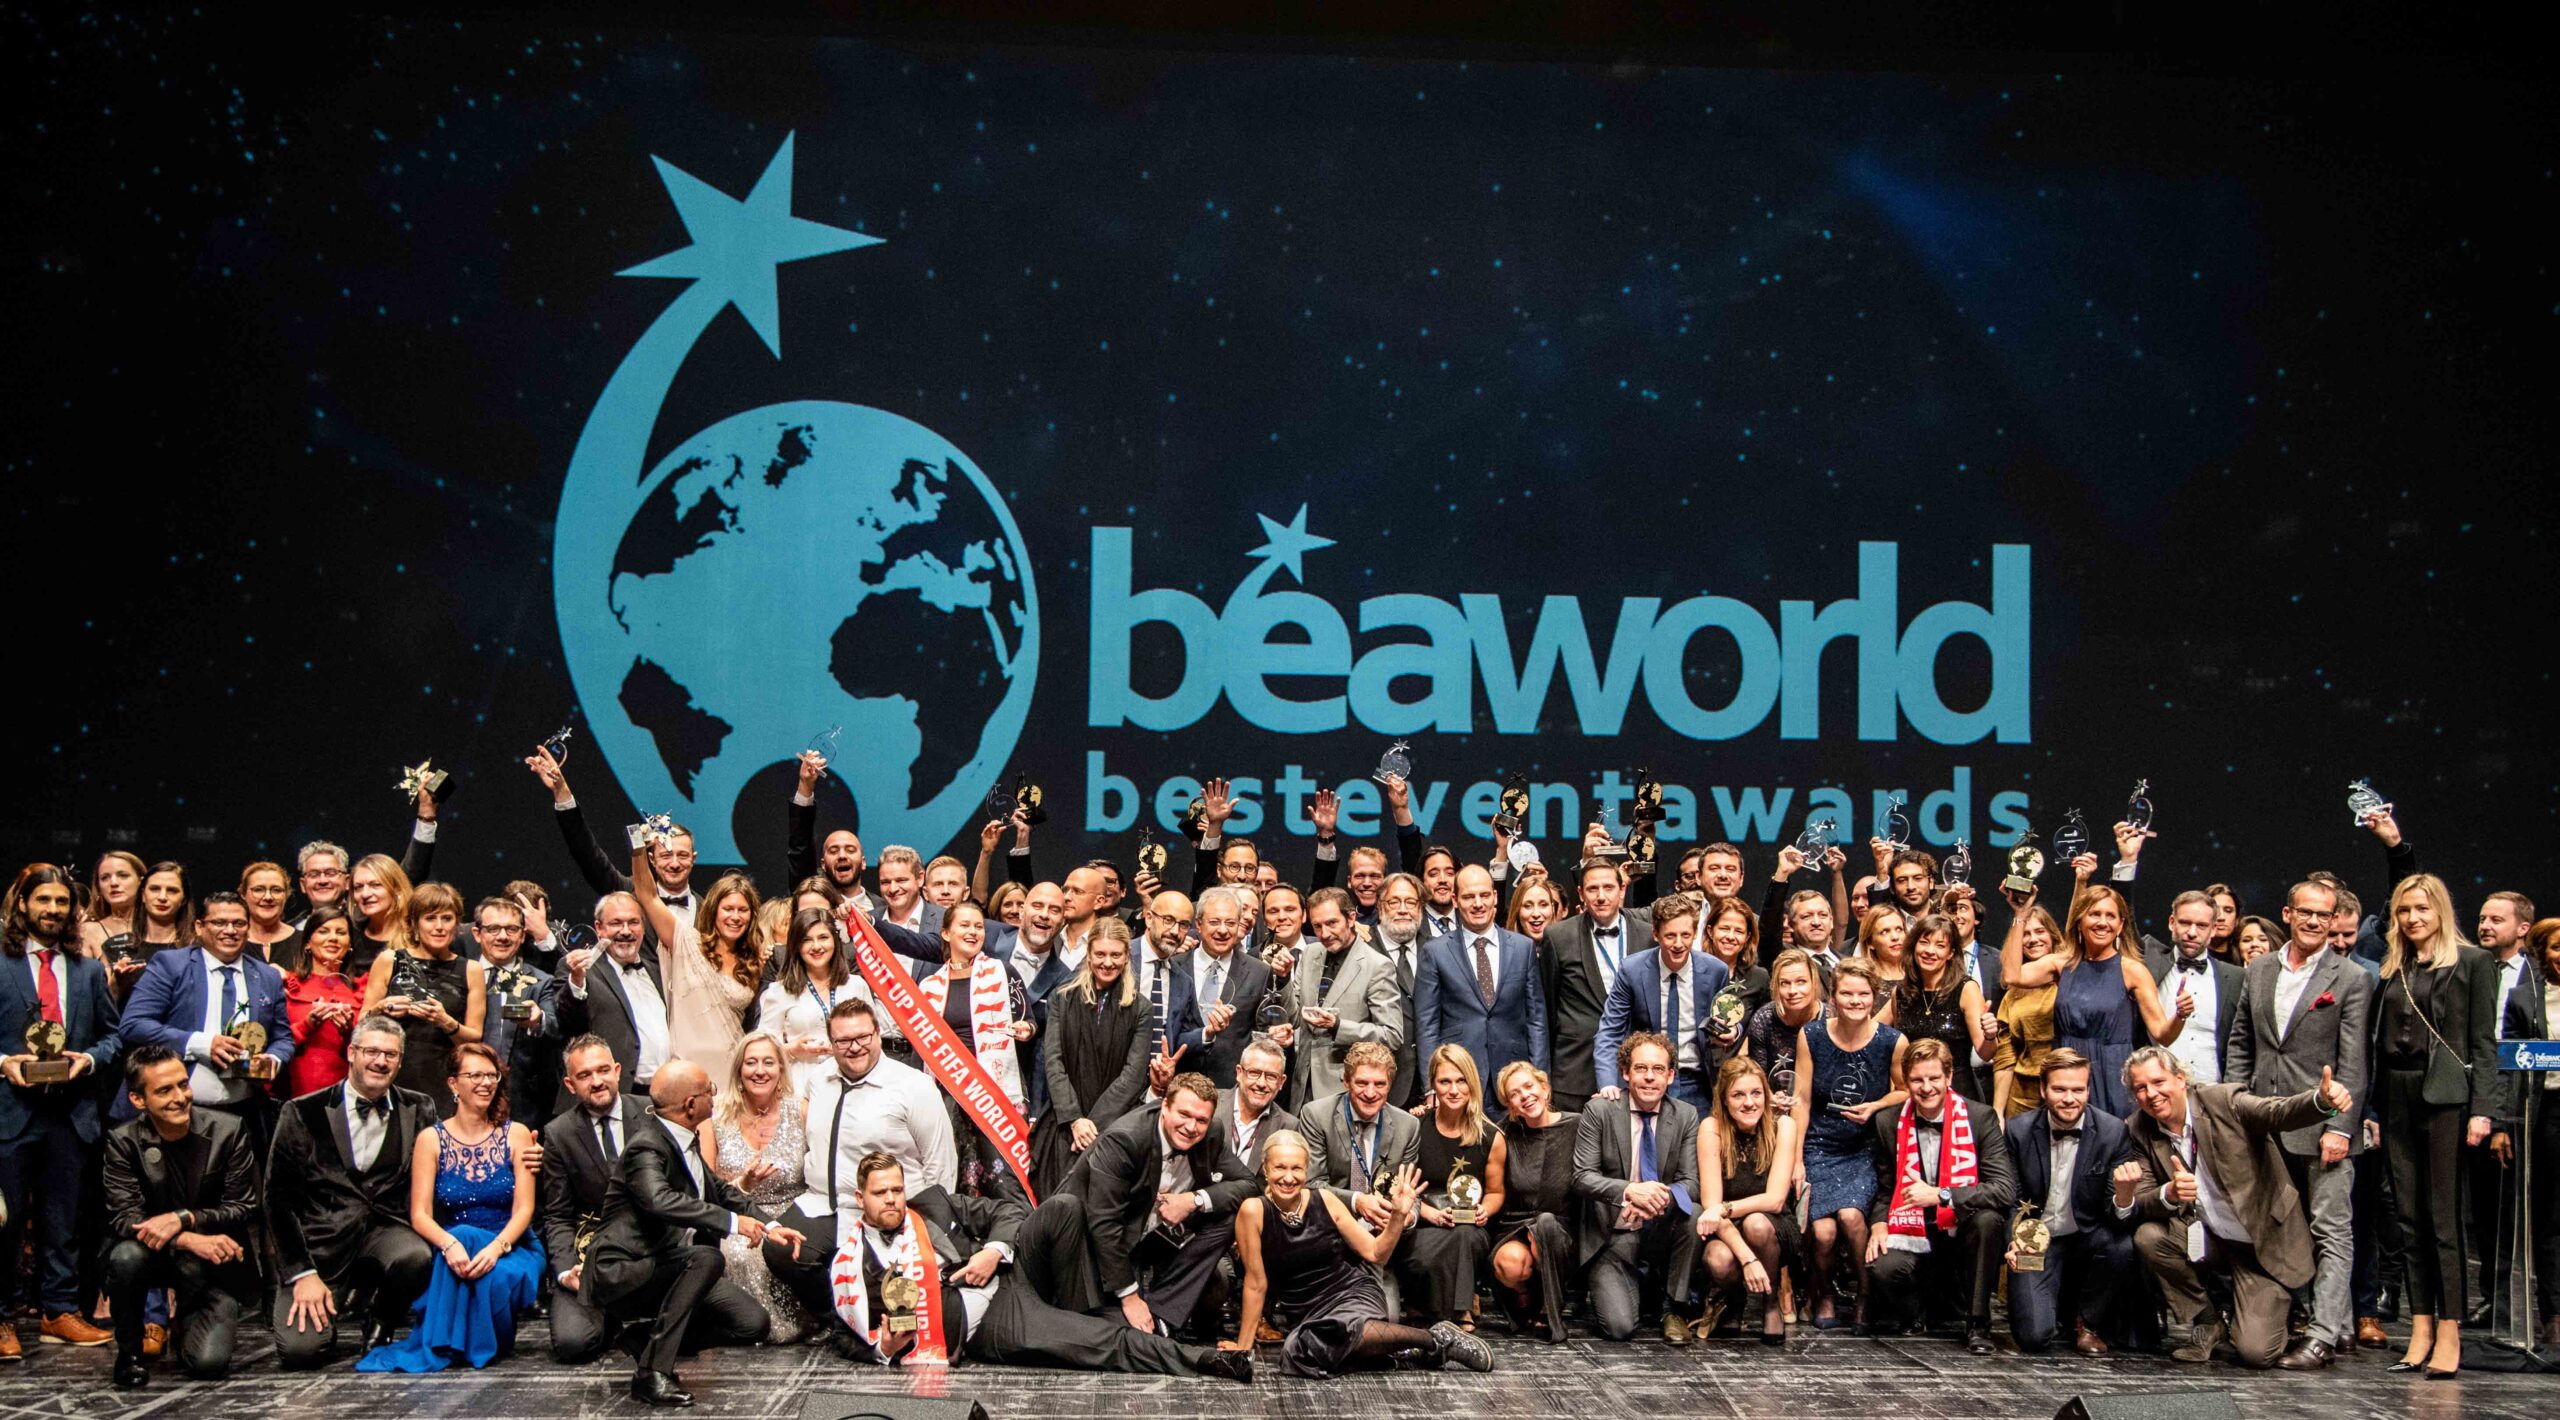 Bea World 2019: the jury is at work to assess entries  from 30 countries, the highest number ever.